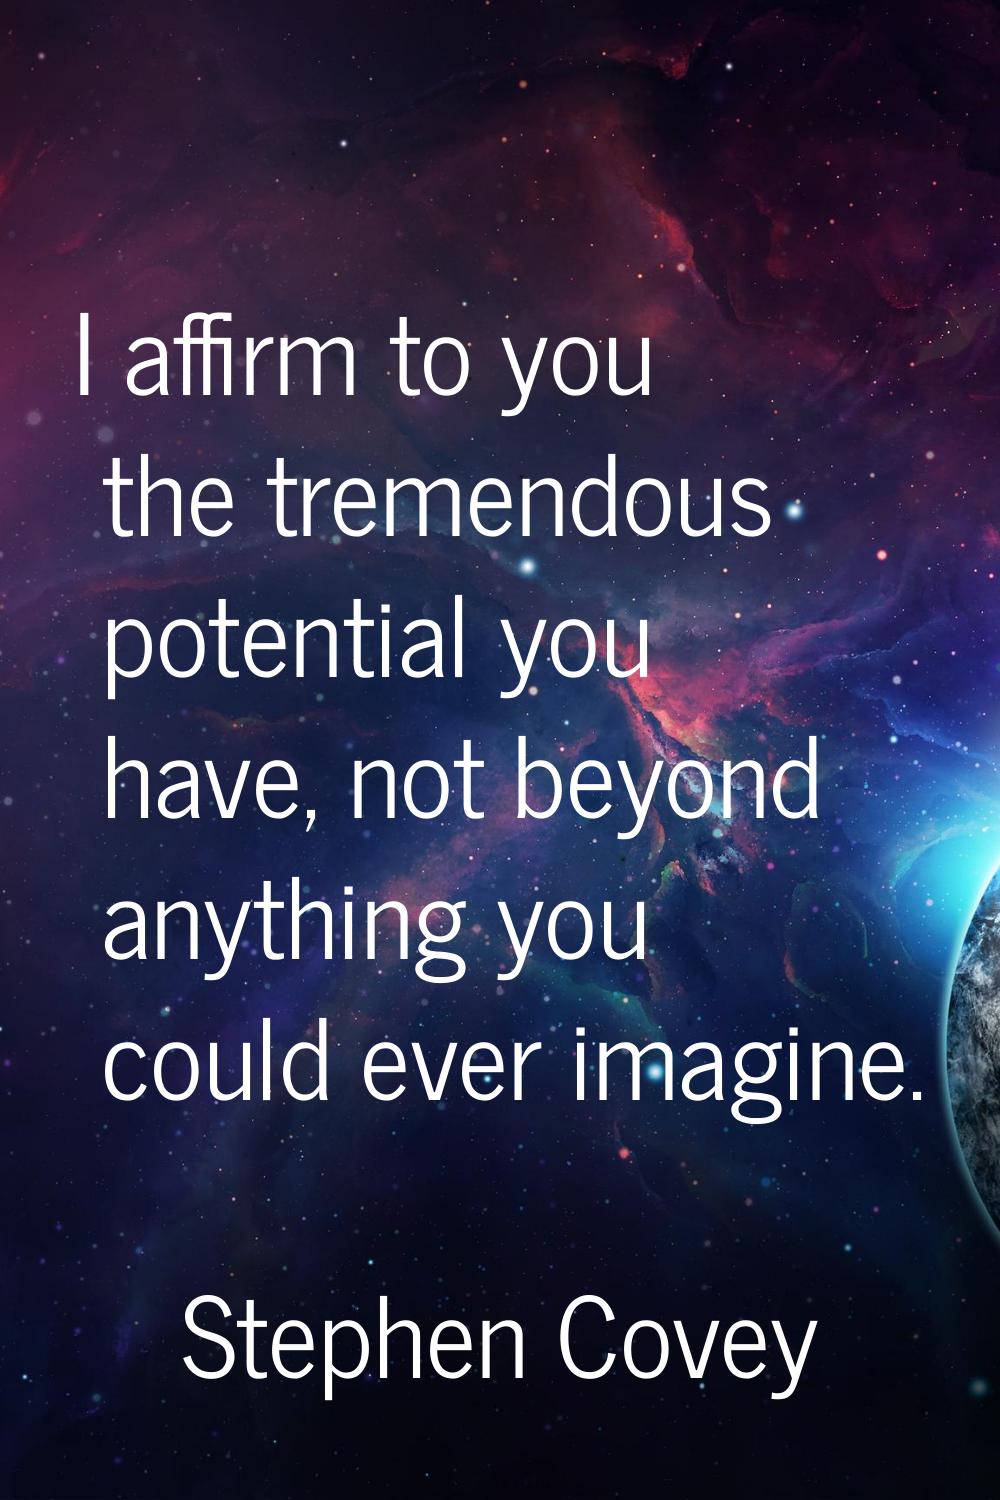 I affirm to you the tremendous potential you have, not beyond anything you could ever imagine.